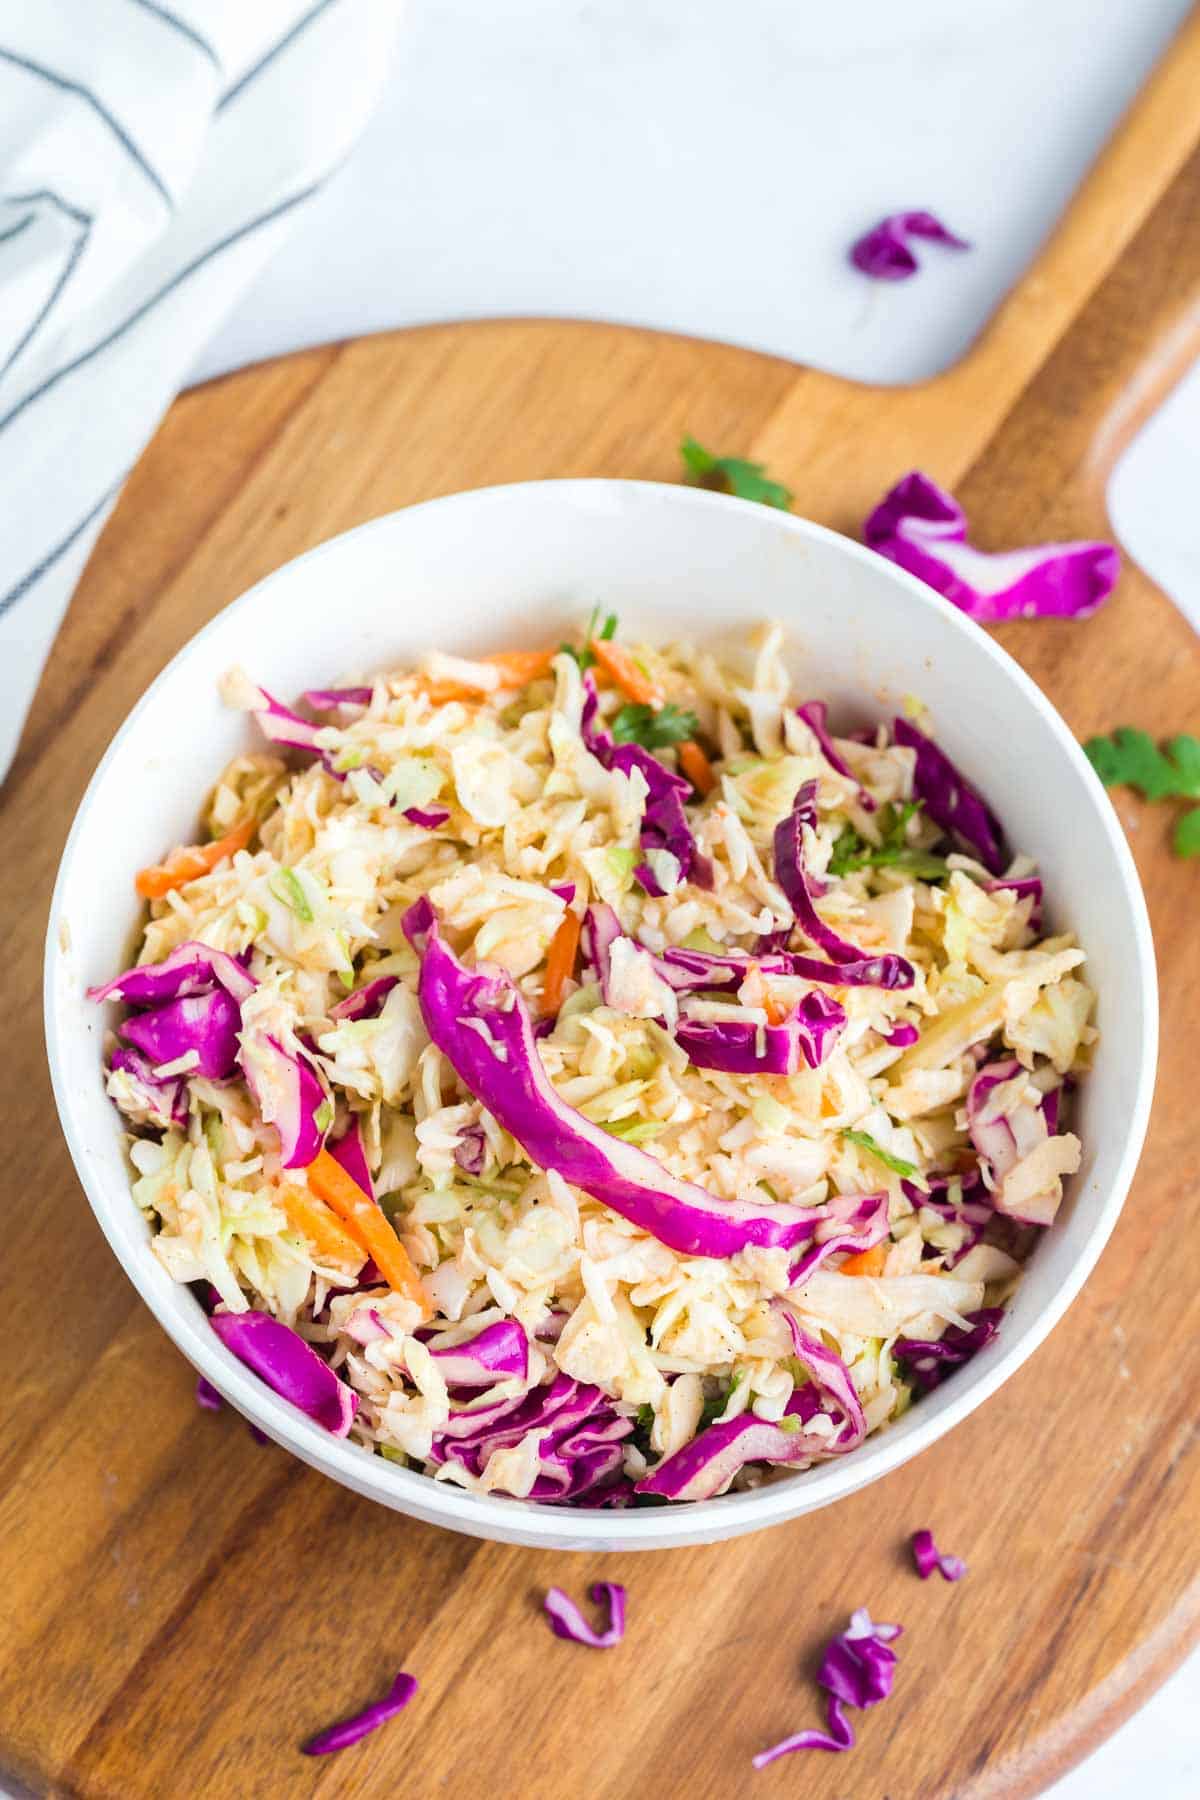 chipotle coleslaw with red cabbge